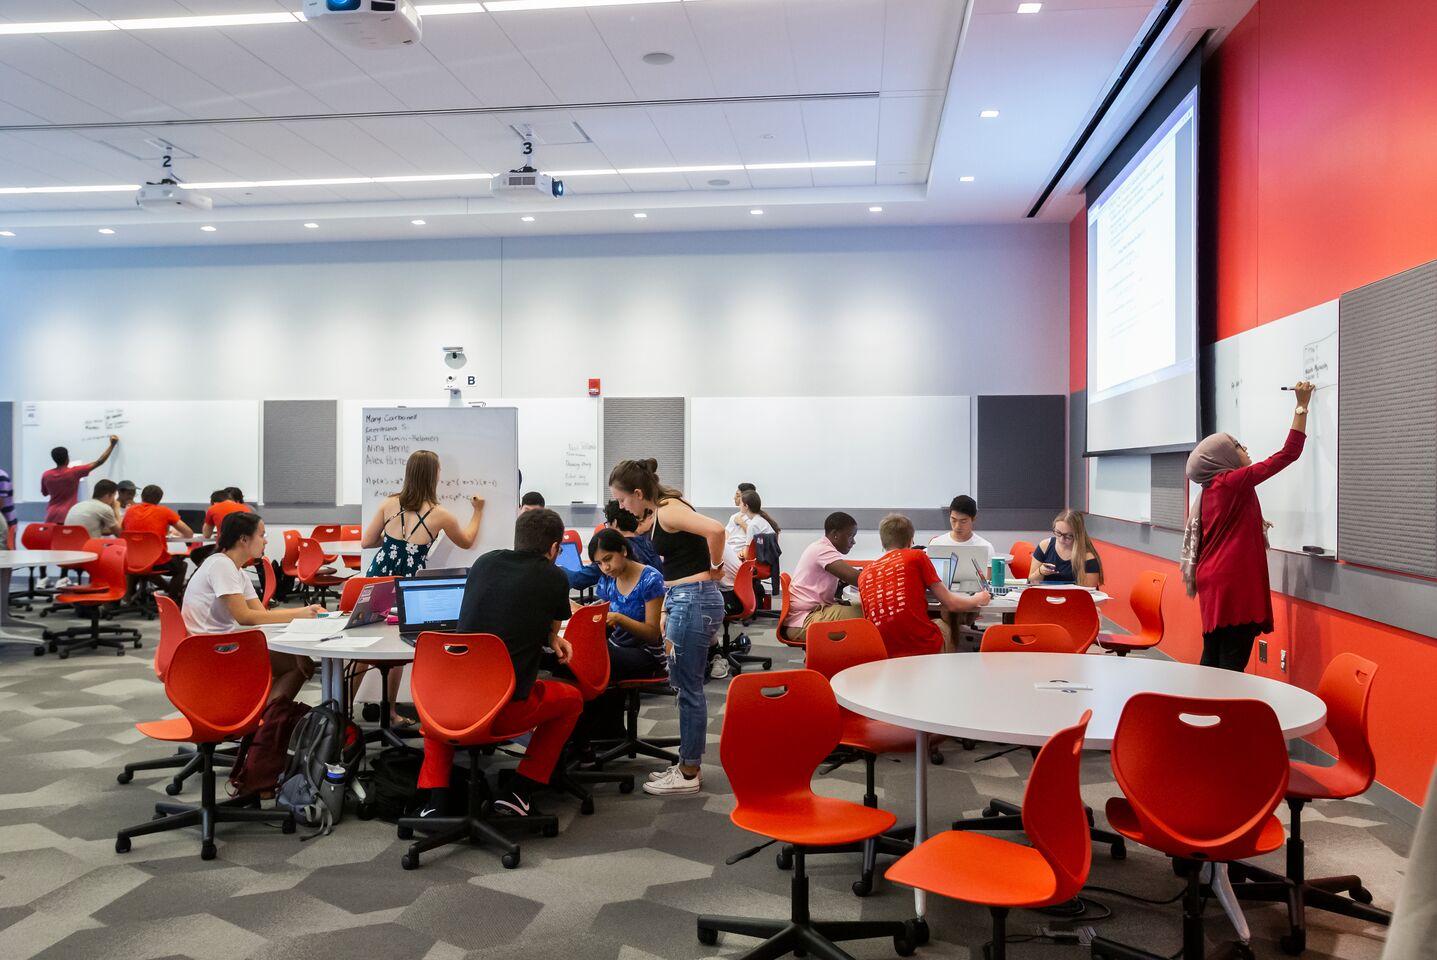 Students working a modern classroom in the Edward St. John Learning and Teaching Center.